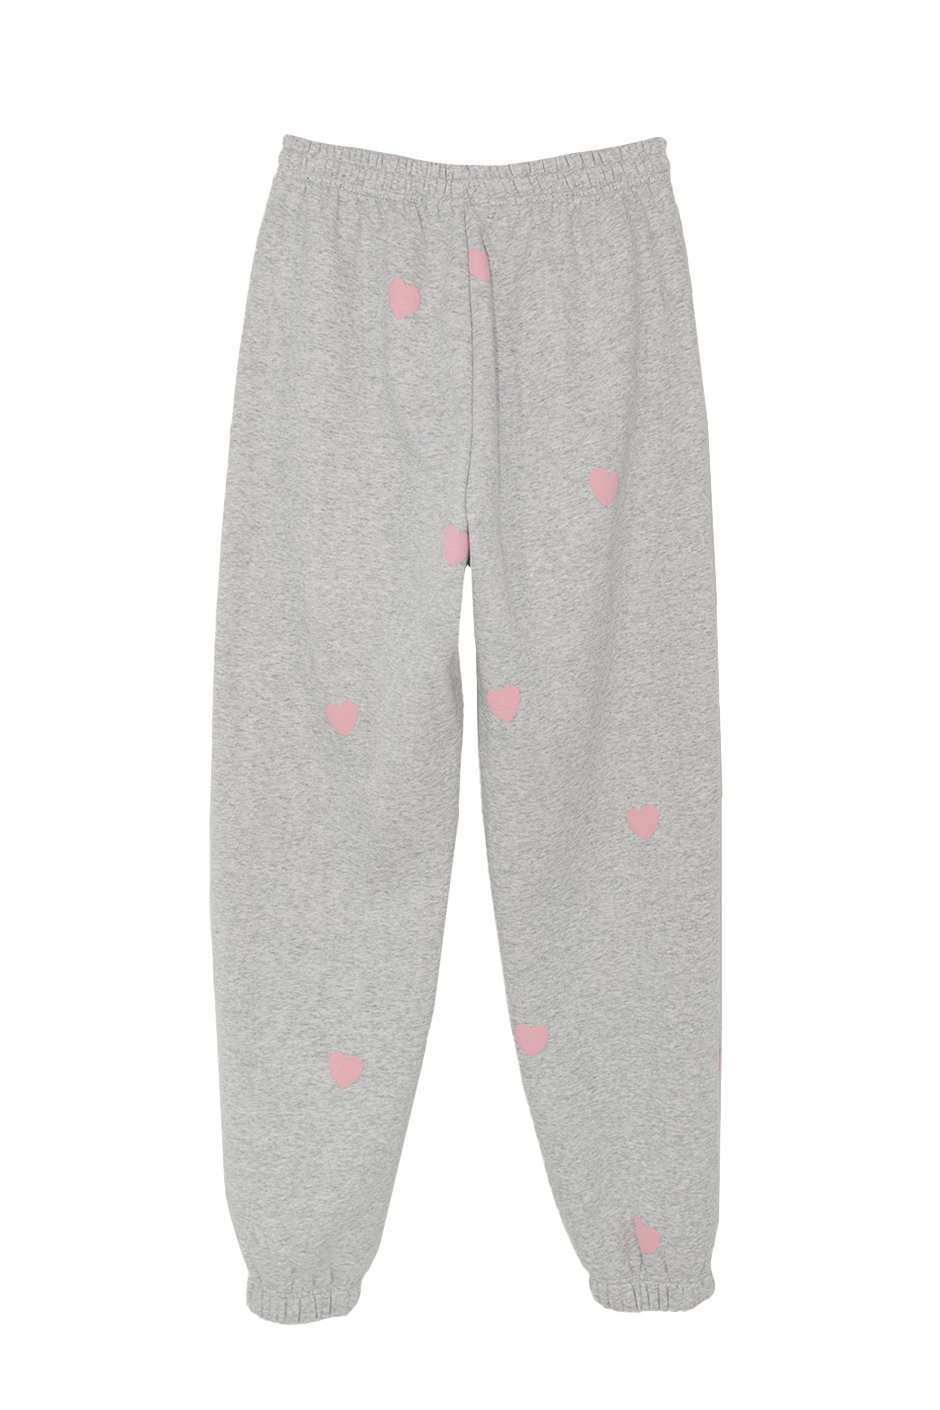 The All Over Heart Sweatpants - Heather Grey/Pink - XS / Heather Grey/Pink